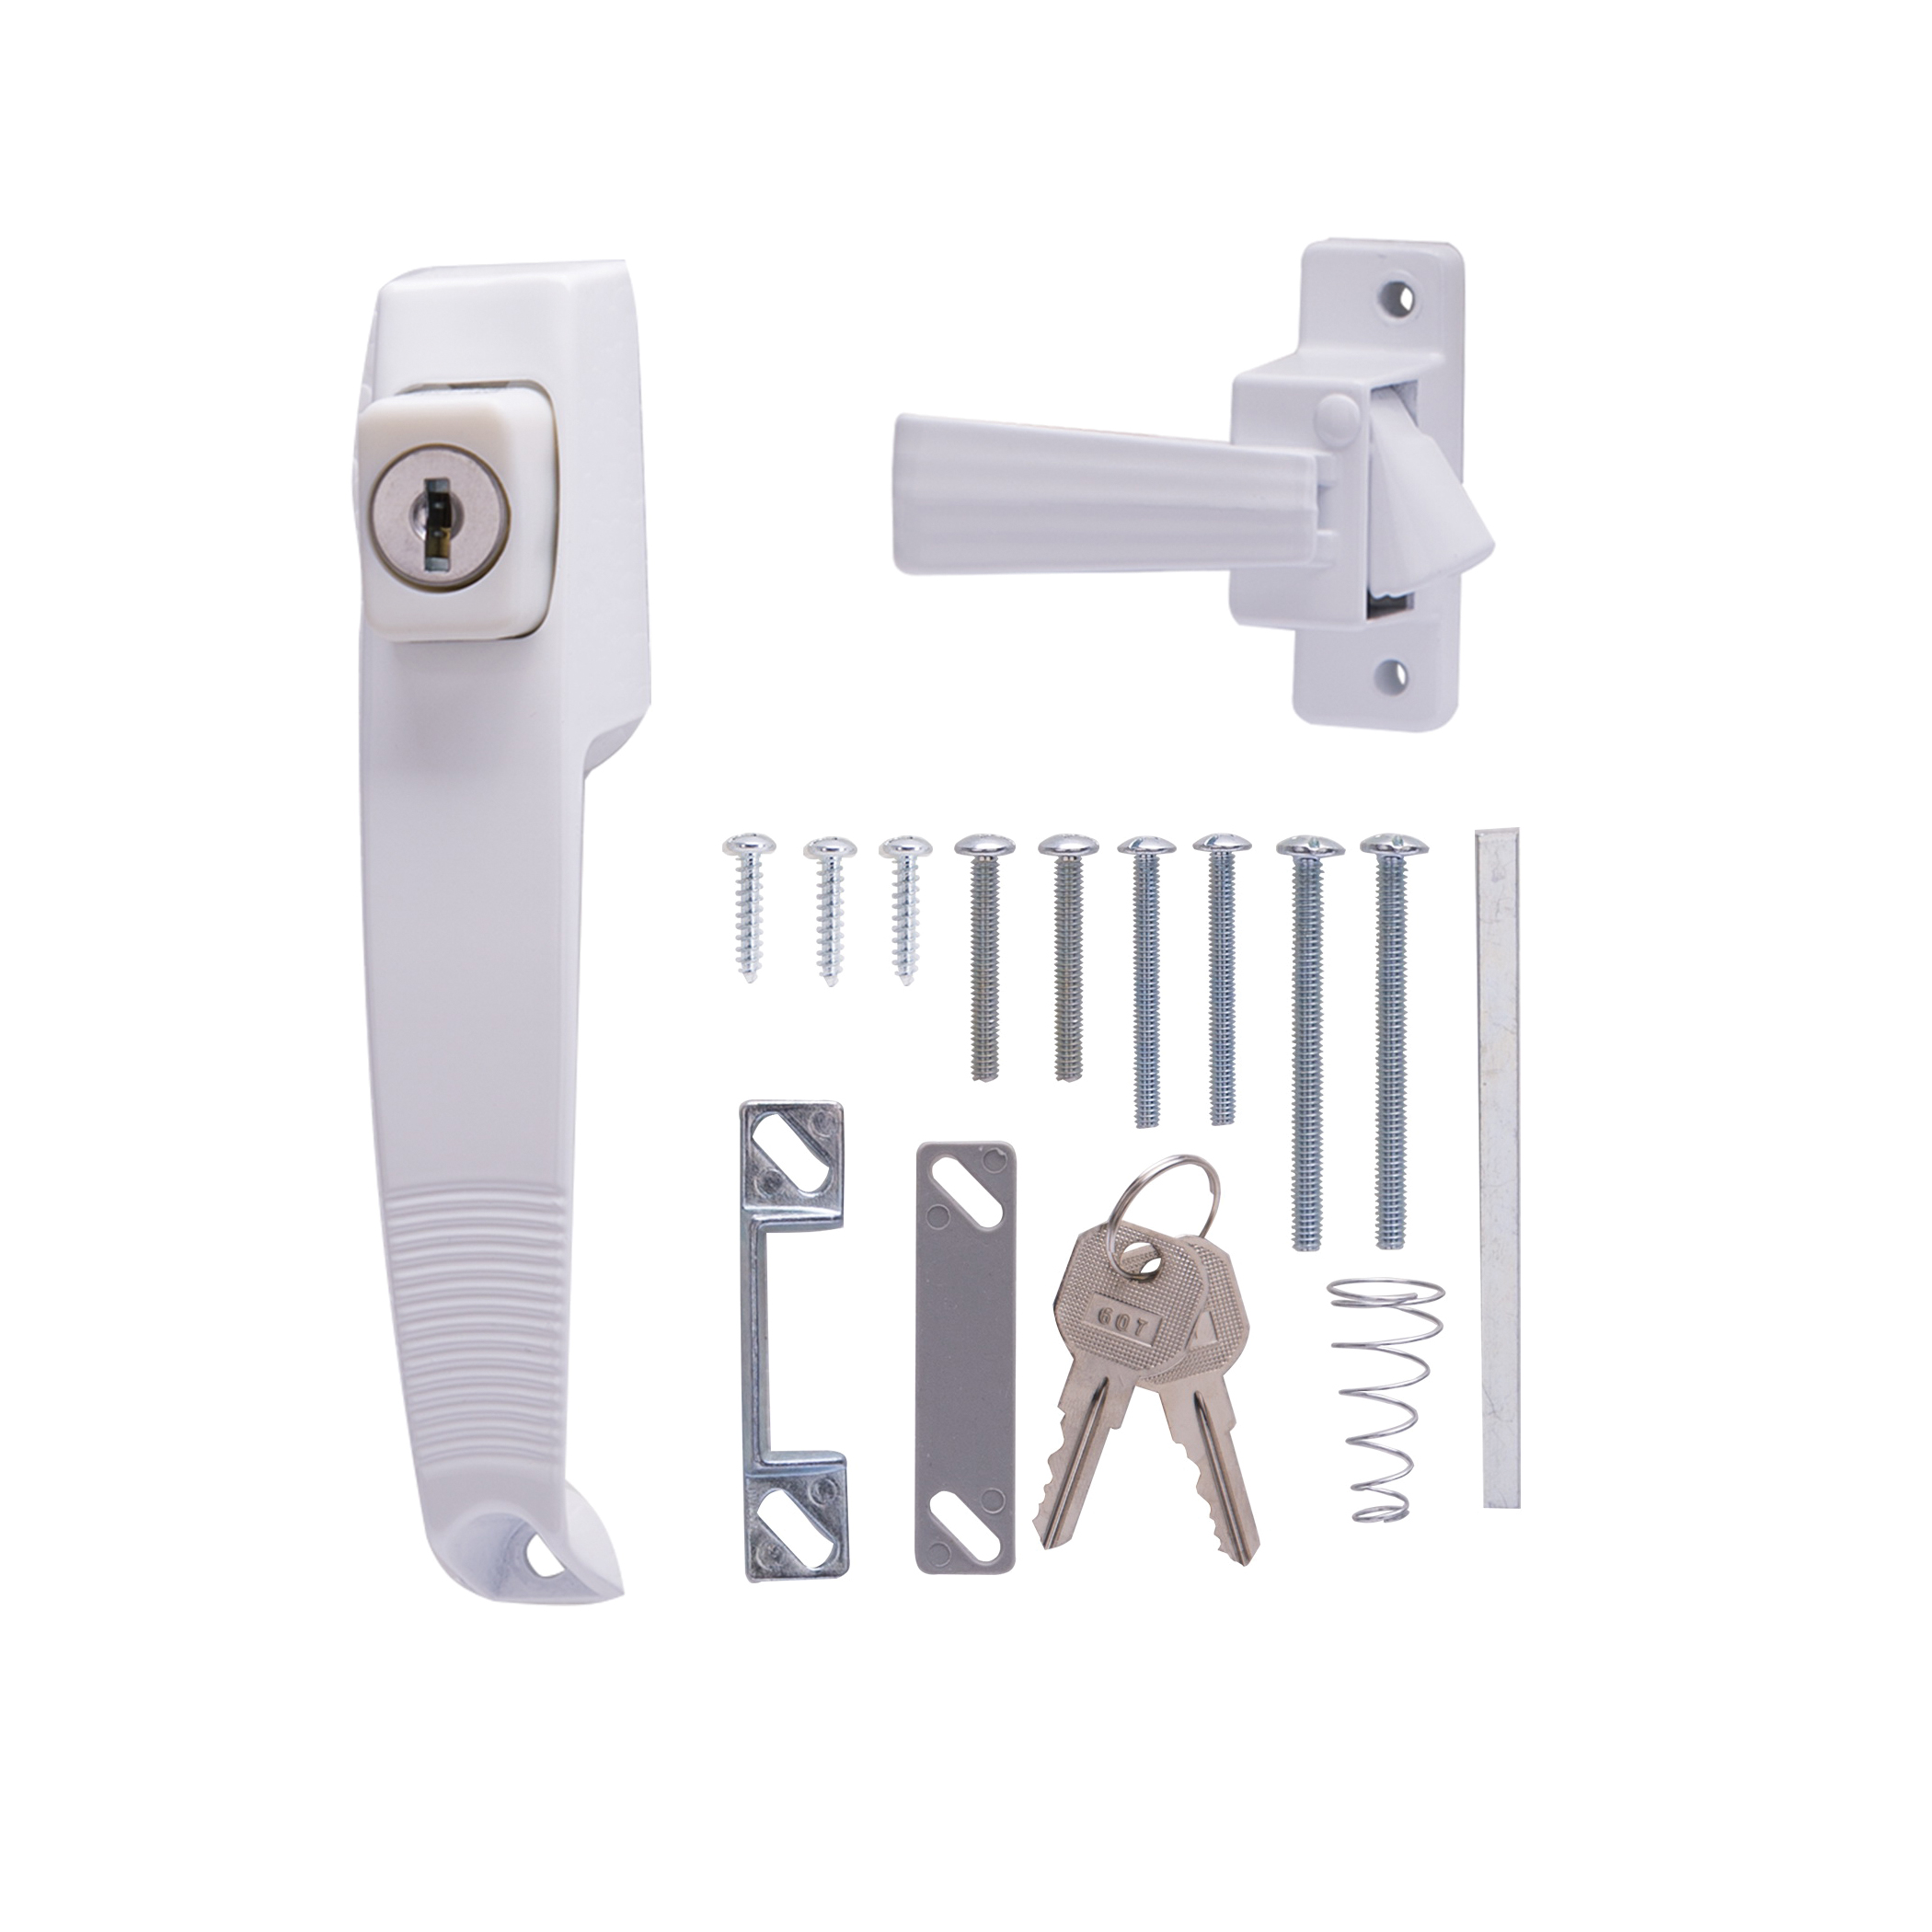 47015-UKW-PS Pushbutton Latch, Zinc, White, 5/8 to 1-1/2 in Thick Door, 5/8 in Backset, 5-7/8 in Lever/Knob